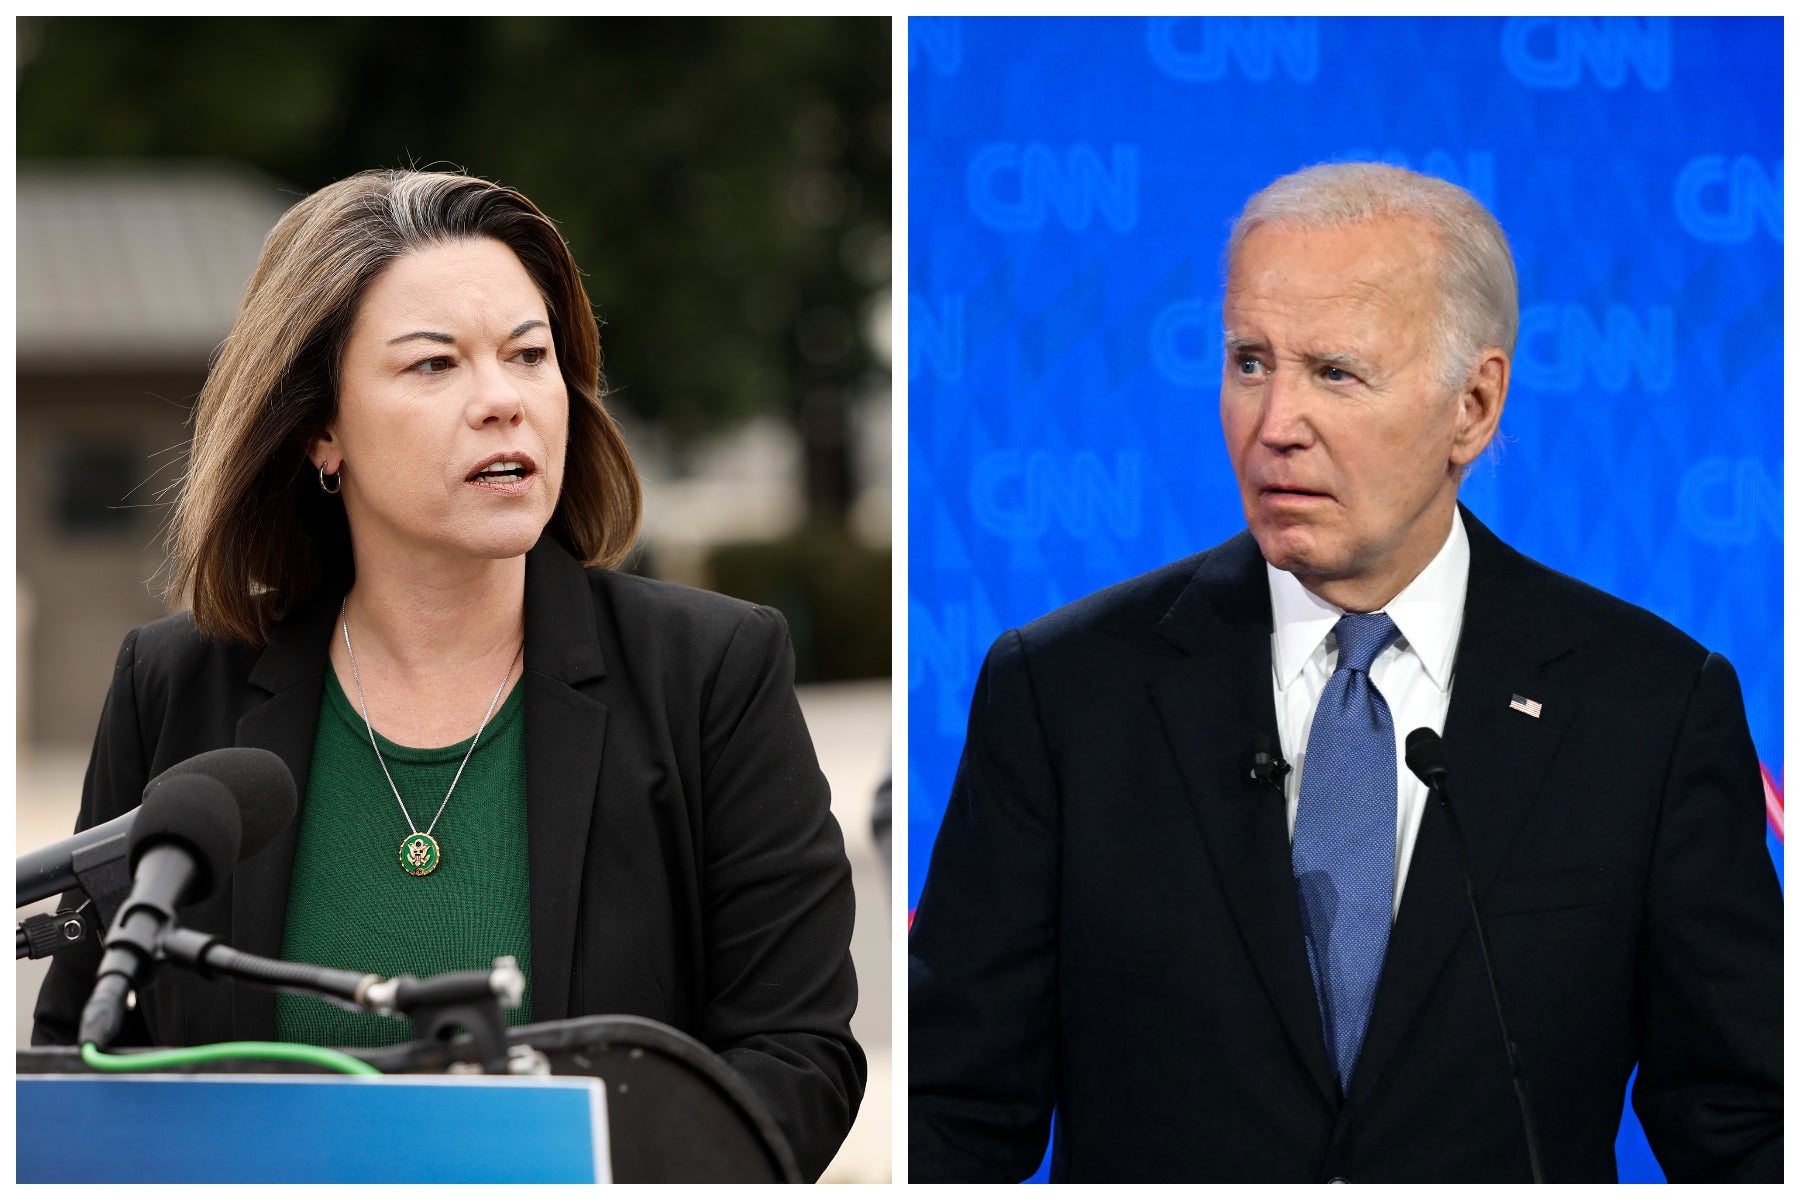 Representative Angie Craig called on president Joe Biden to drop out of the 2024 presidential race, citing his debate performance